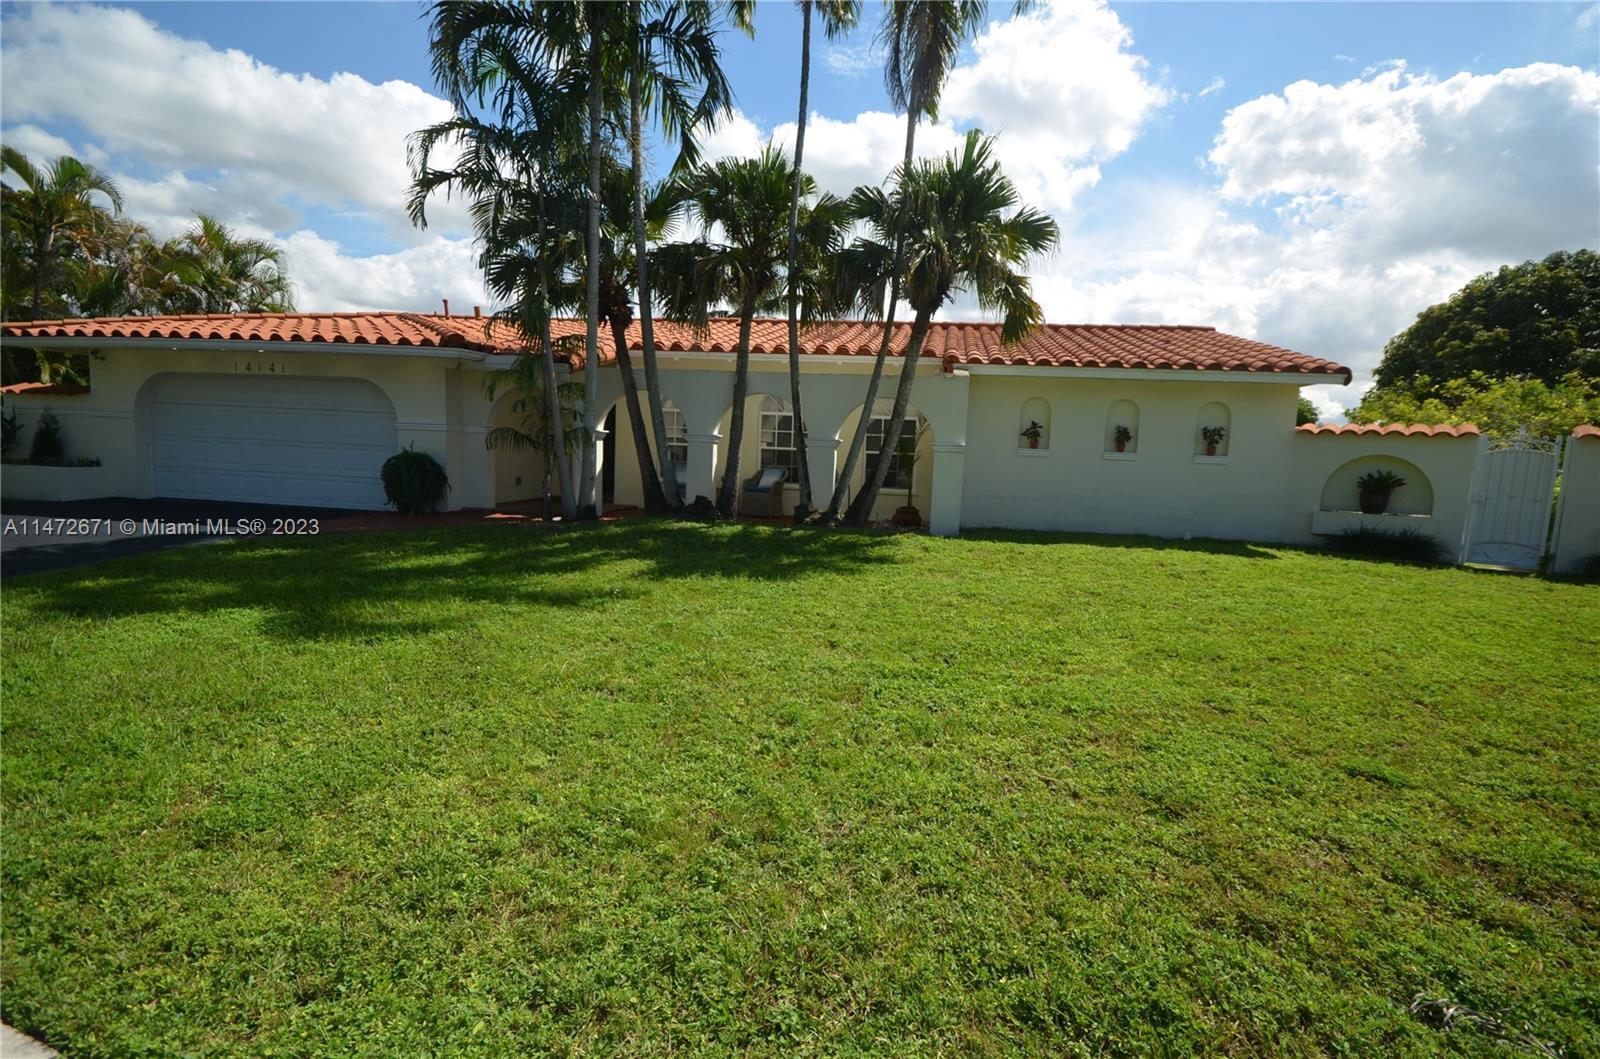 Photo of 14141 Leaning Pine Dr in Miami Lakes, FL